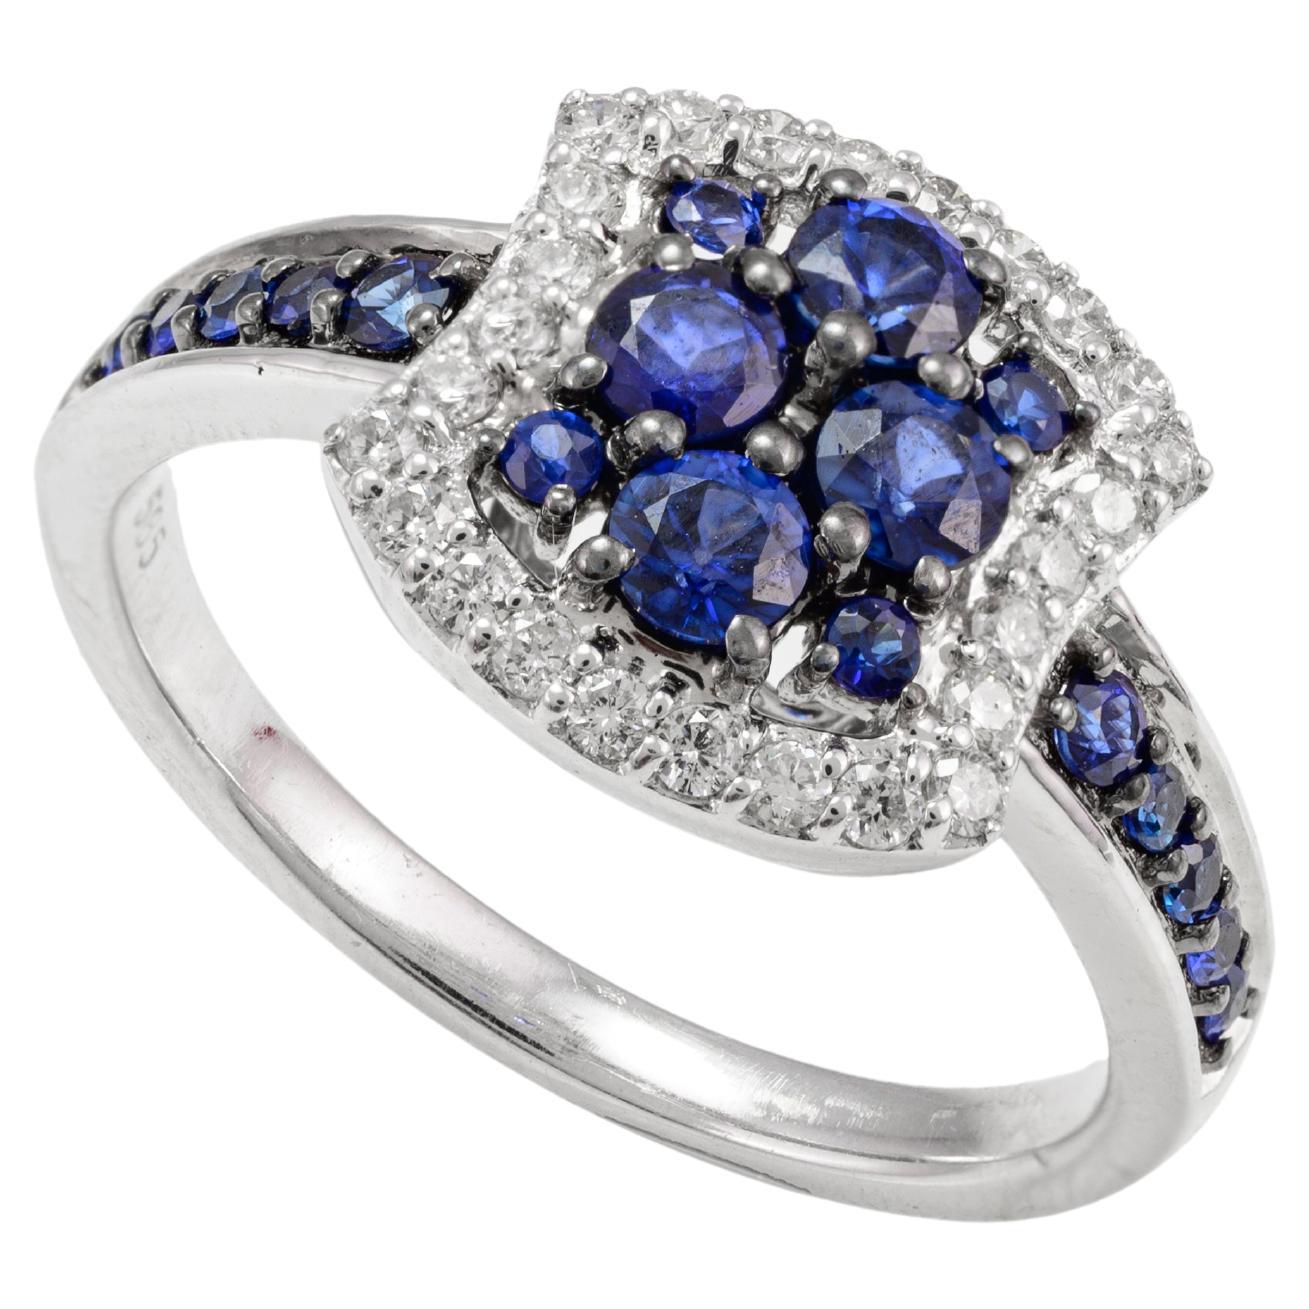 For Sale:  Antique Blue Sapphire and Diamond Engagement Ring in 14k Solid White Gold